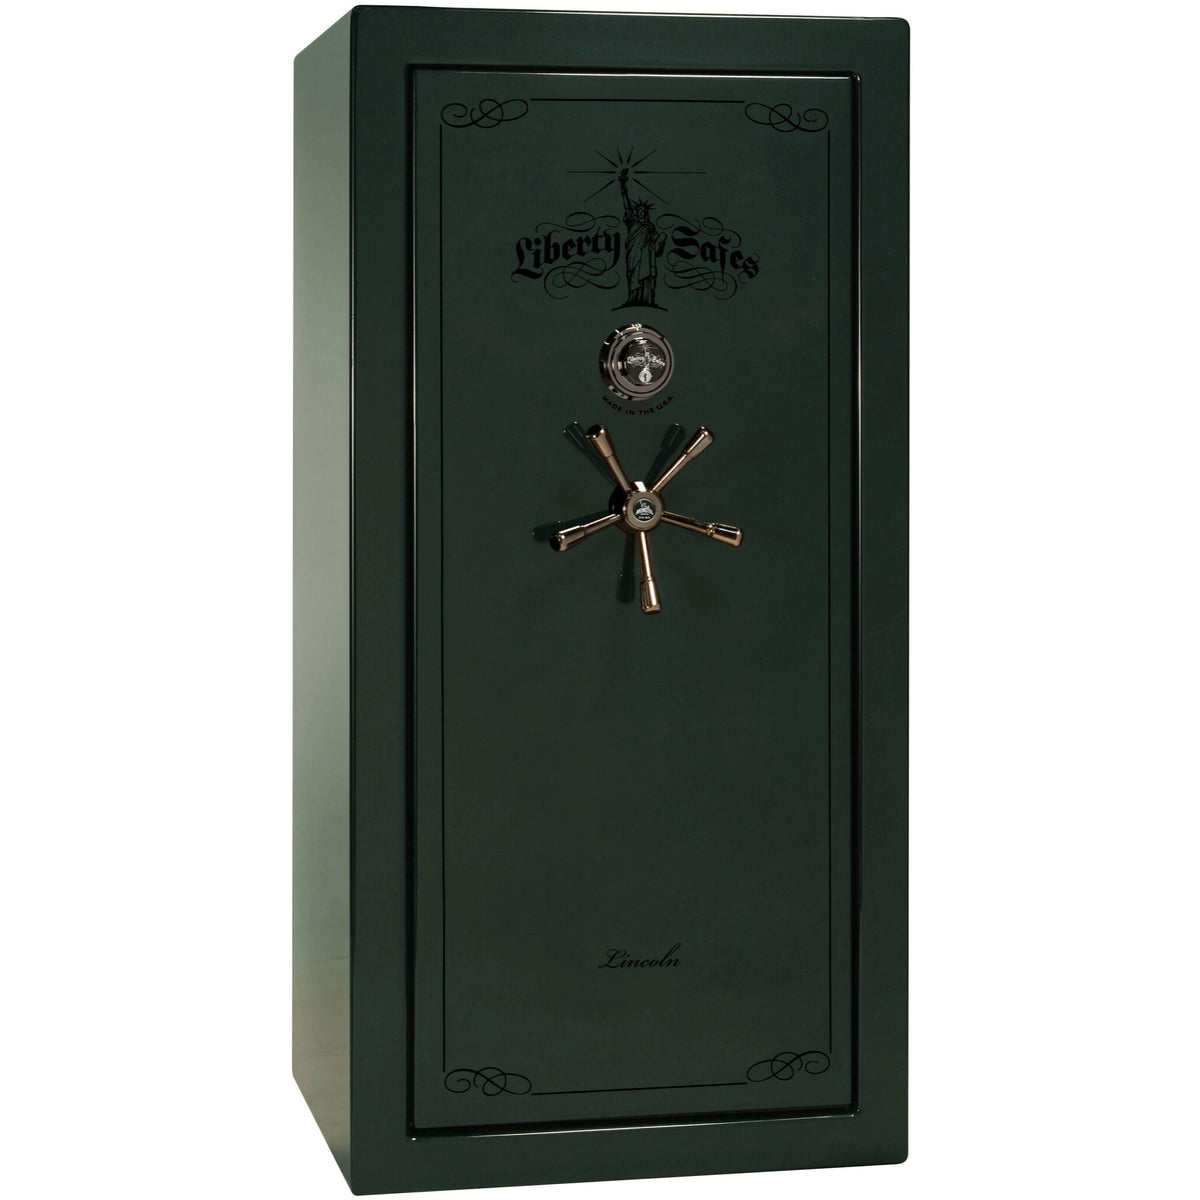 Liberty Lincoln 25 Safe in Green Gloss with Black Chrome Mechanical Lock.